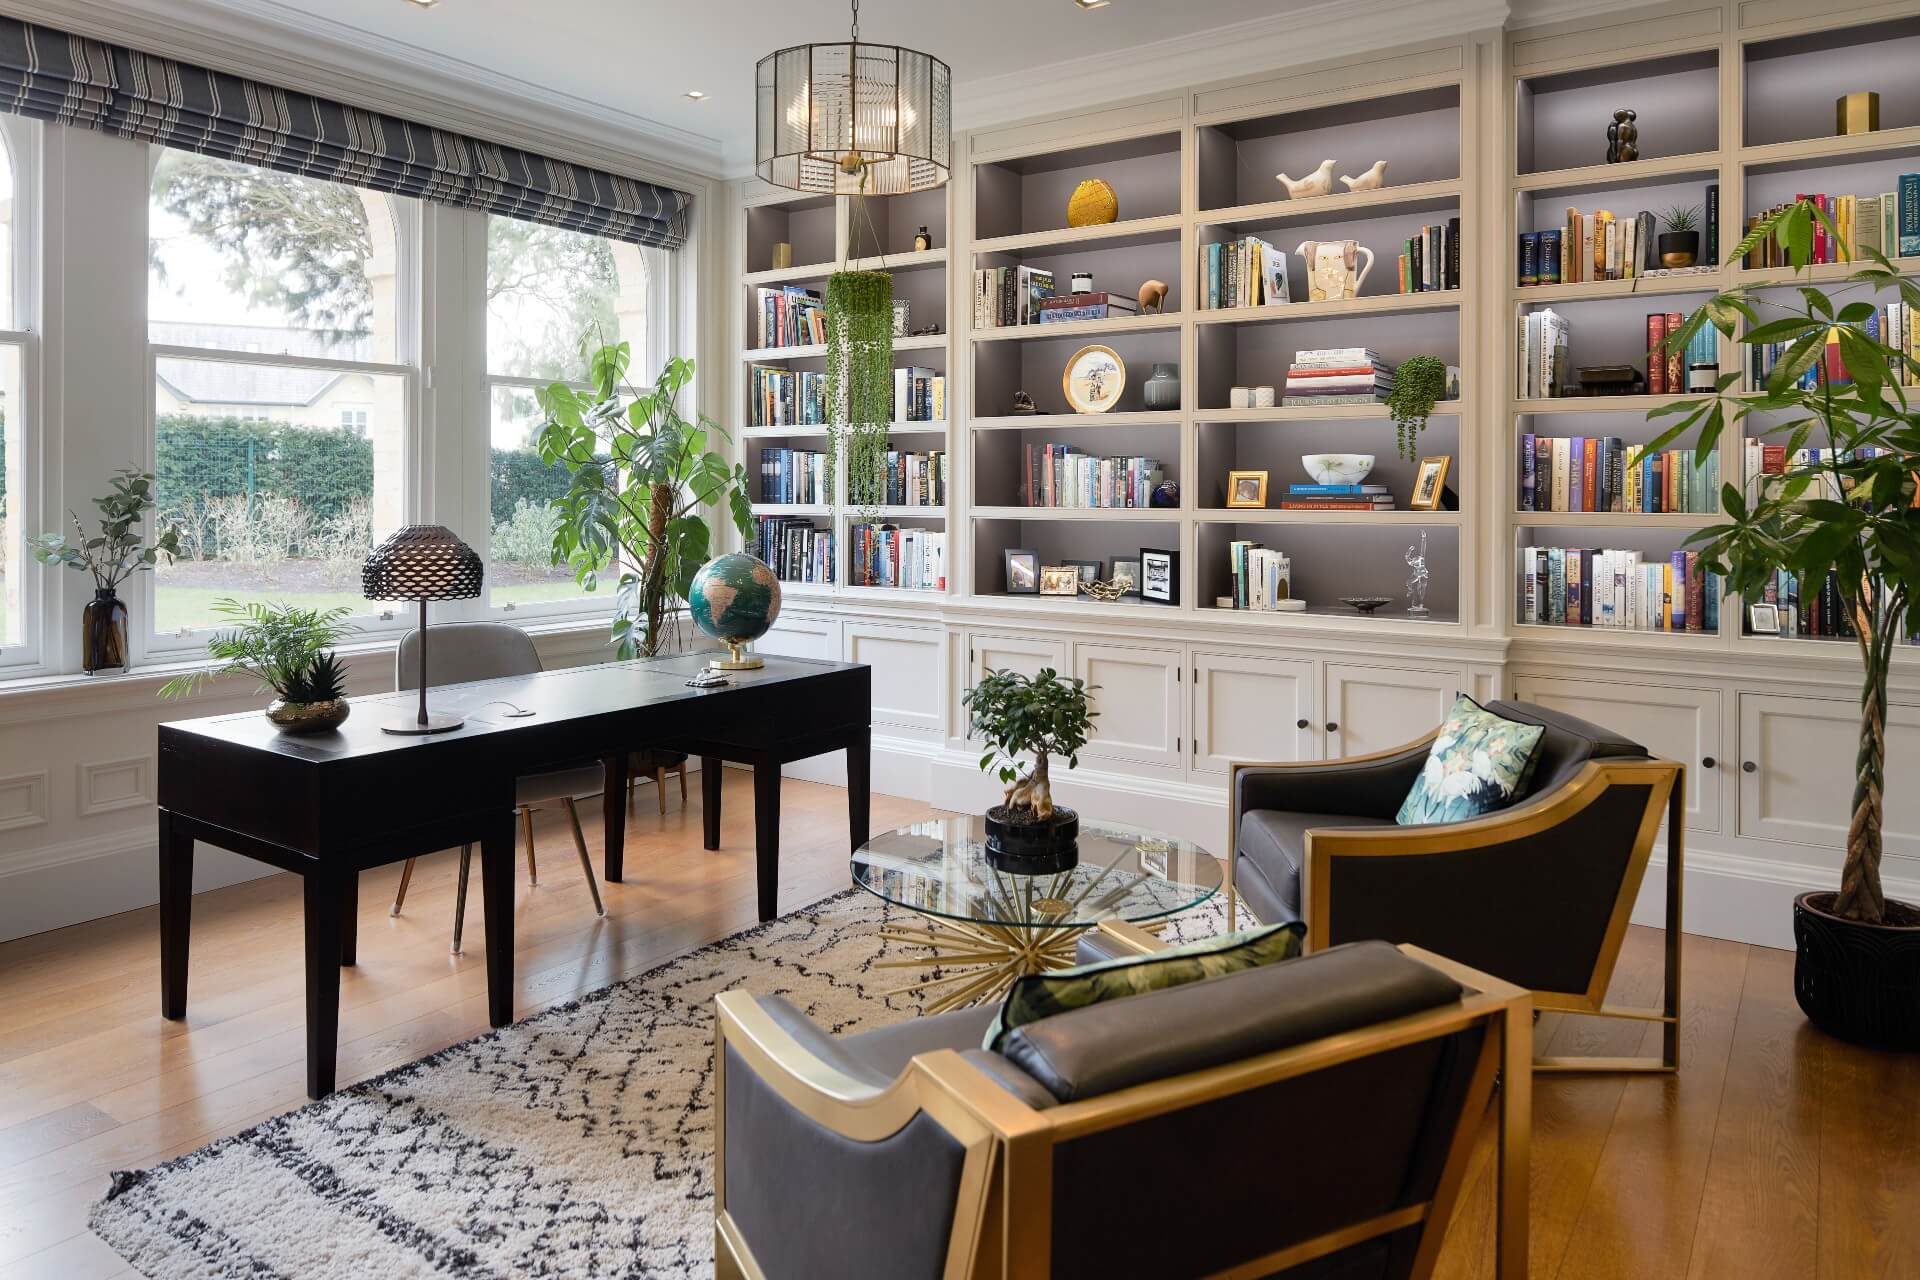 A study with a bespoke made desk and fitted shelving & units by Hetherington Newman